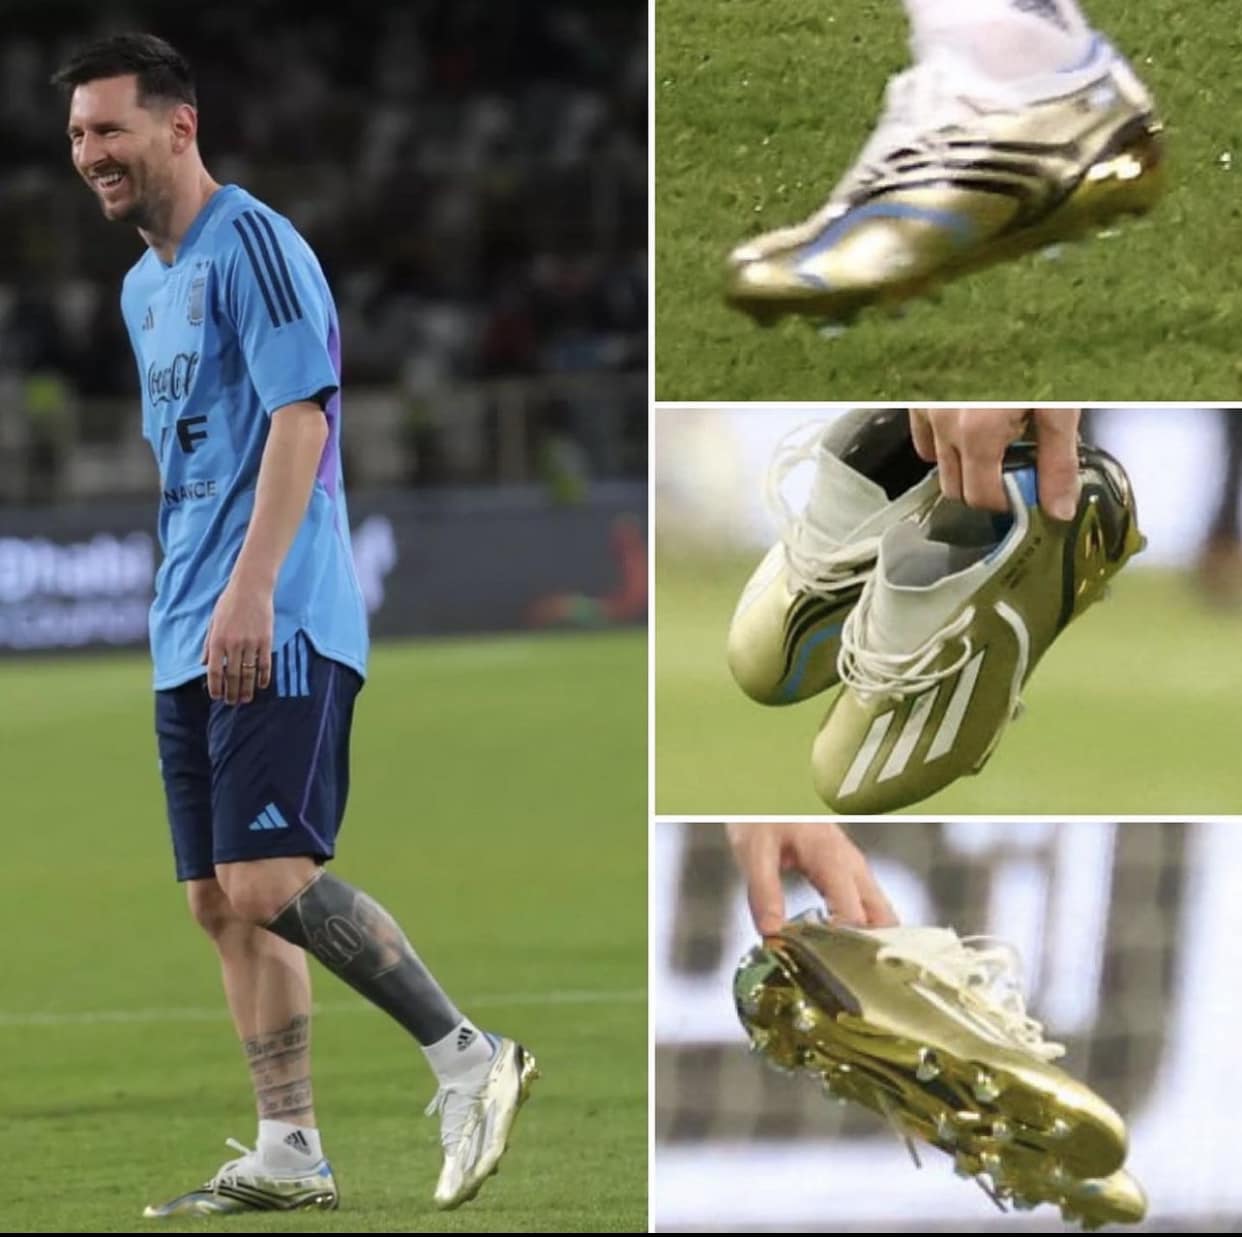 Soccer Cleats 2022 Adidas Messi